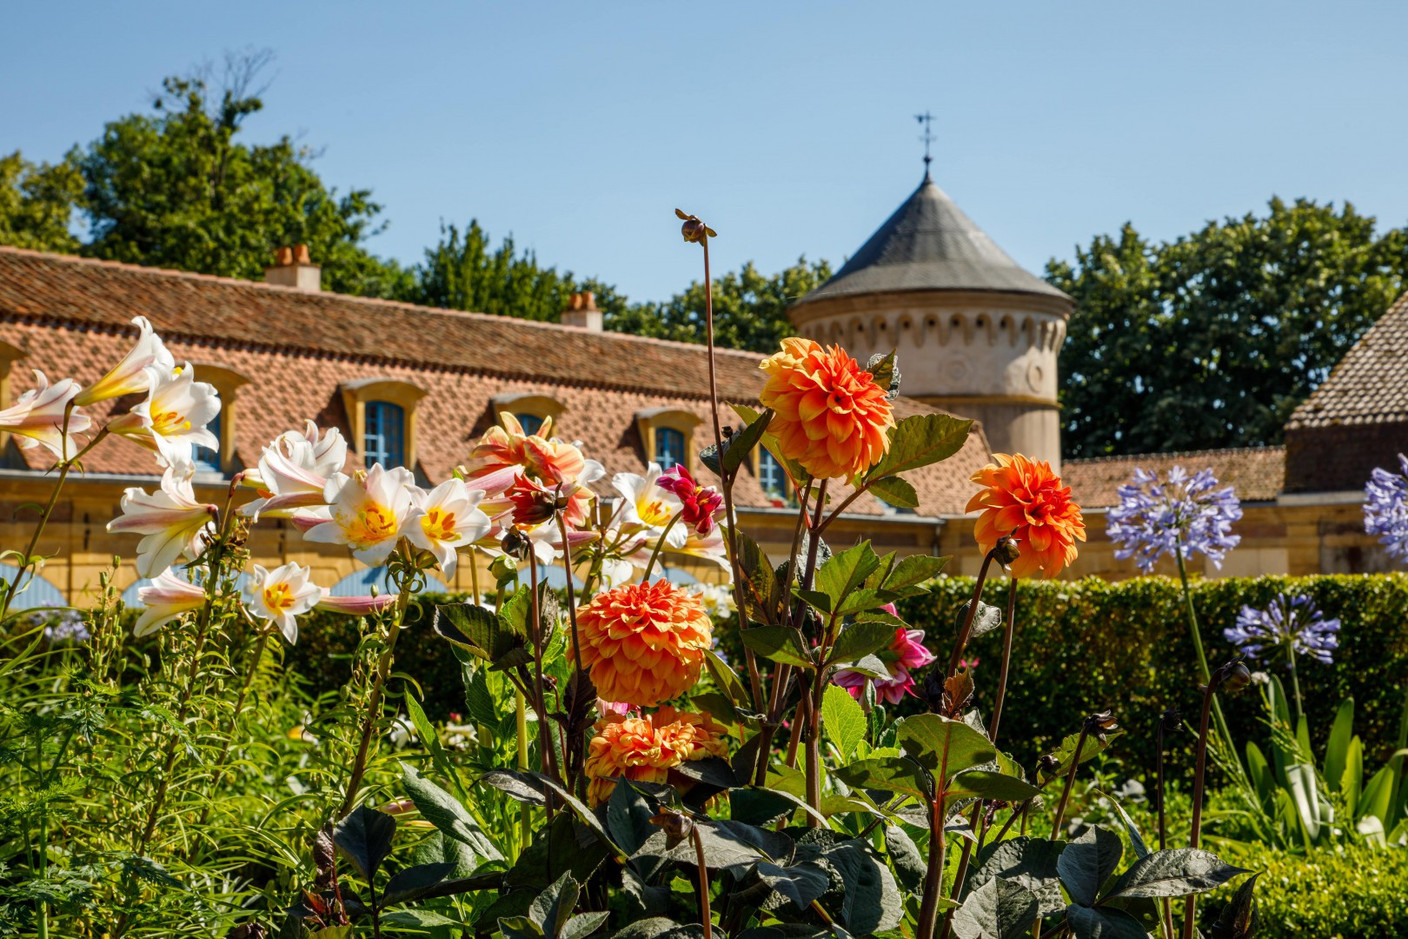 The garden will also soon be open to the public again. (Photo: Château de Lagrange)